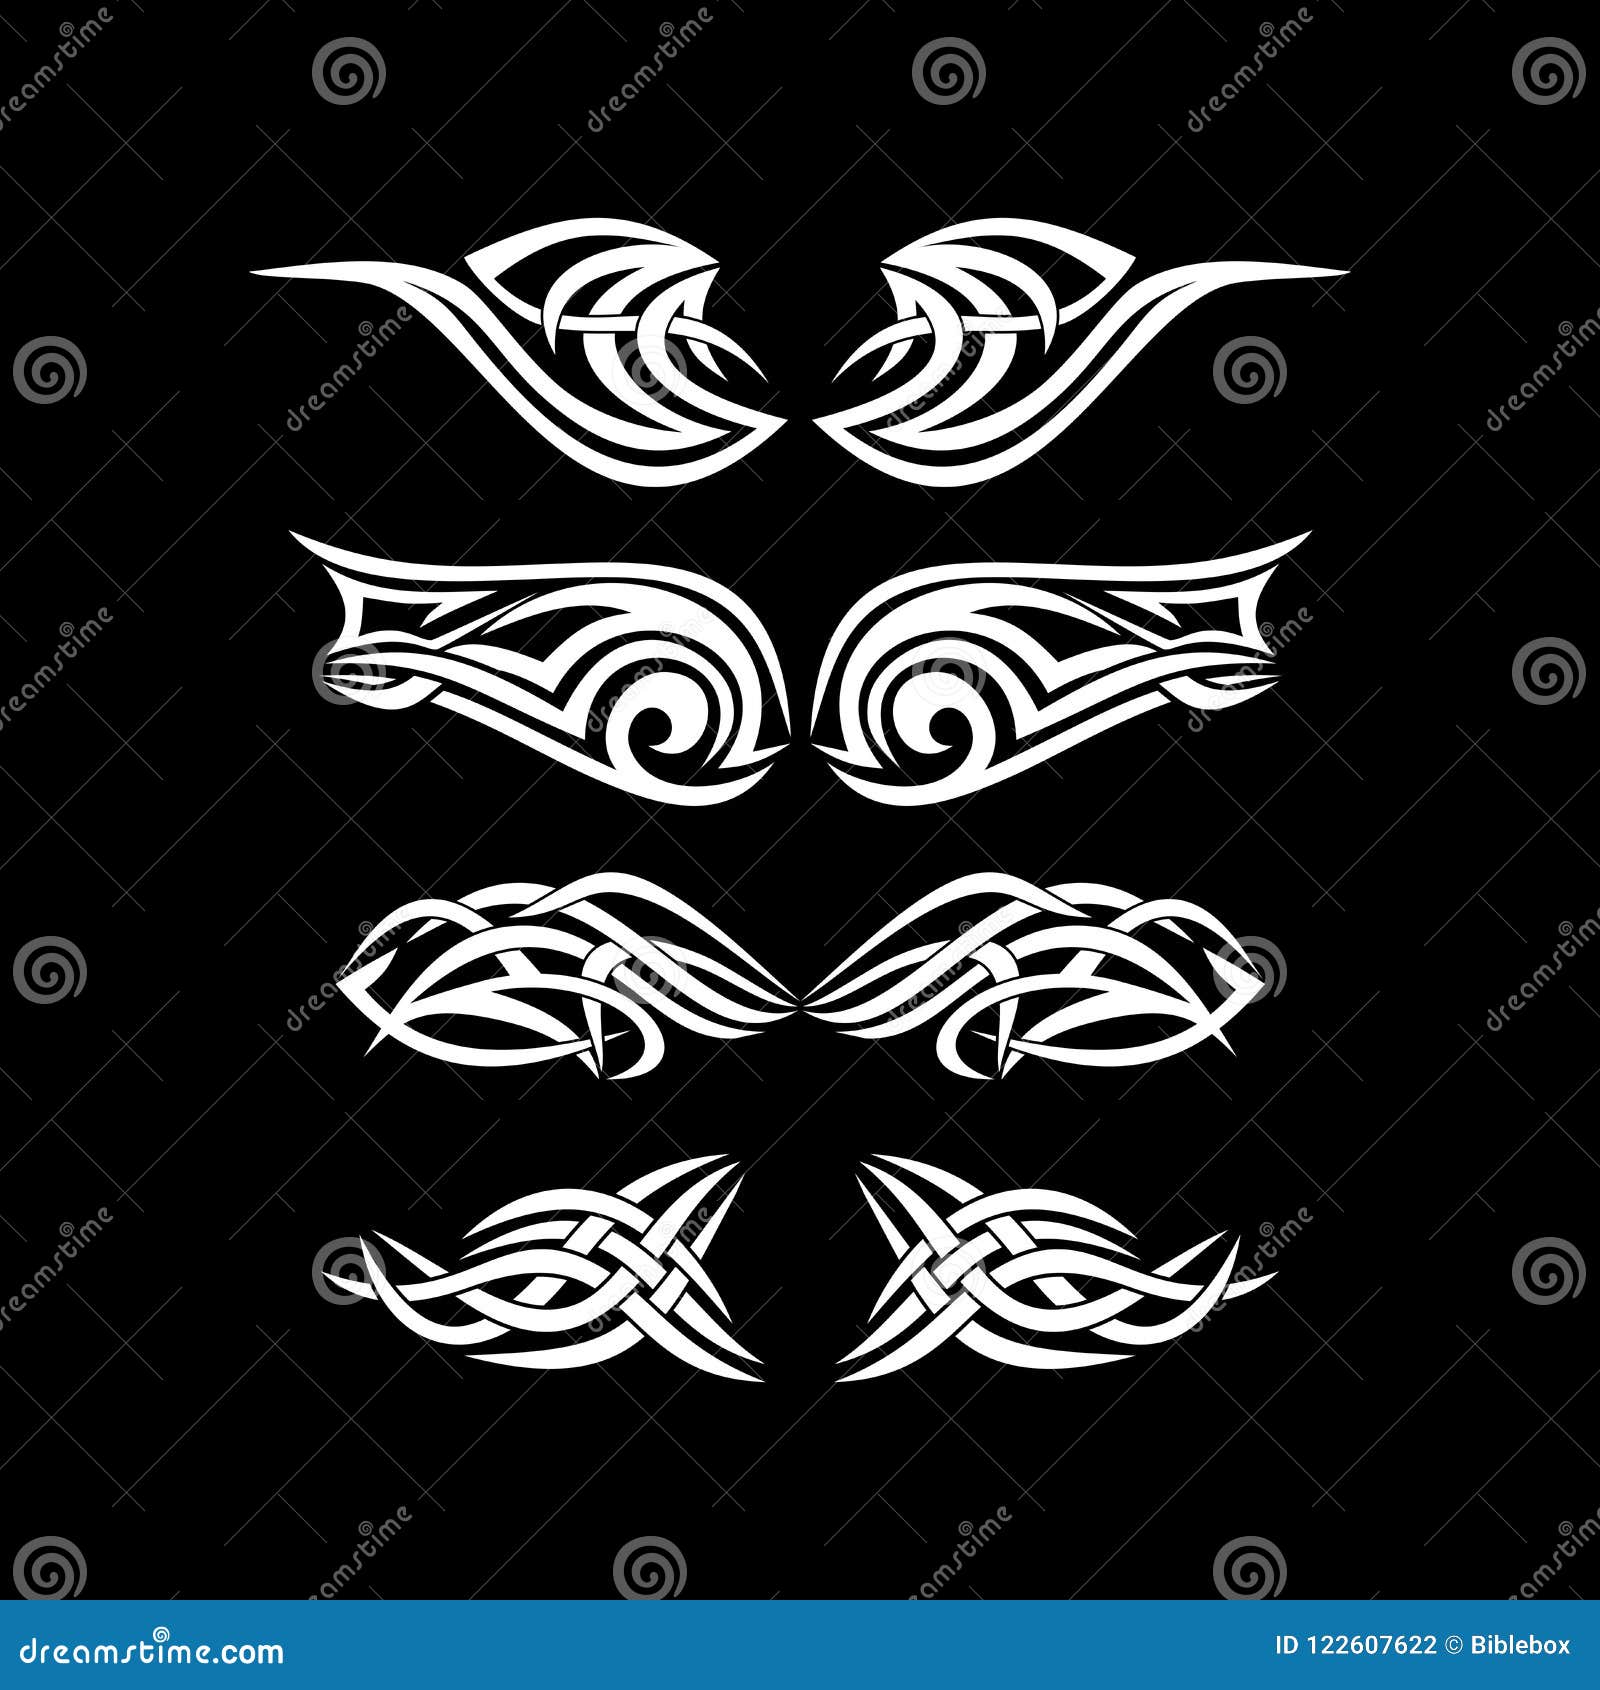 Gothic and Tattoo Marks. Christian Symbols. the Wings of the Holy Spirit.  Stock Vector - Illustration of evangelist, christianity: 122607622